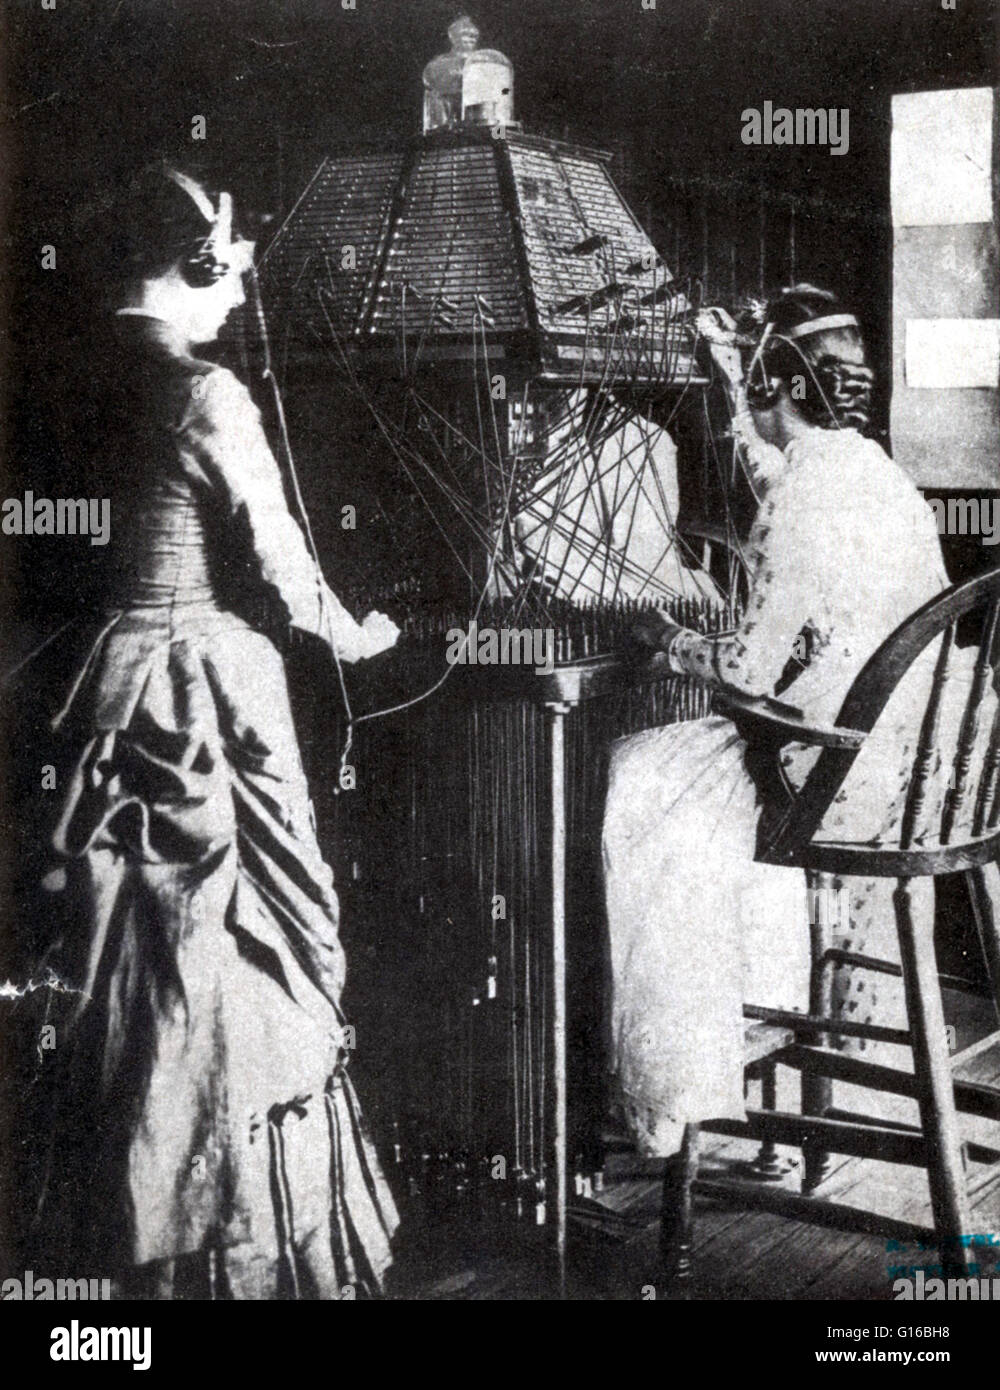 Women operators plugging into a lampshade switchboard in Richmond, Virginia in 1884. Early switchboards in large cities usually were mounted floor to ceiling in order to allow the operators to reach all the lines in the exchange. The operators were boys w Stock Photo